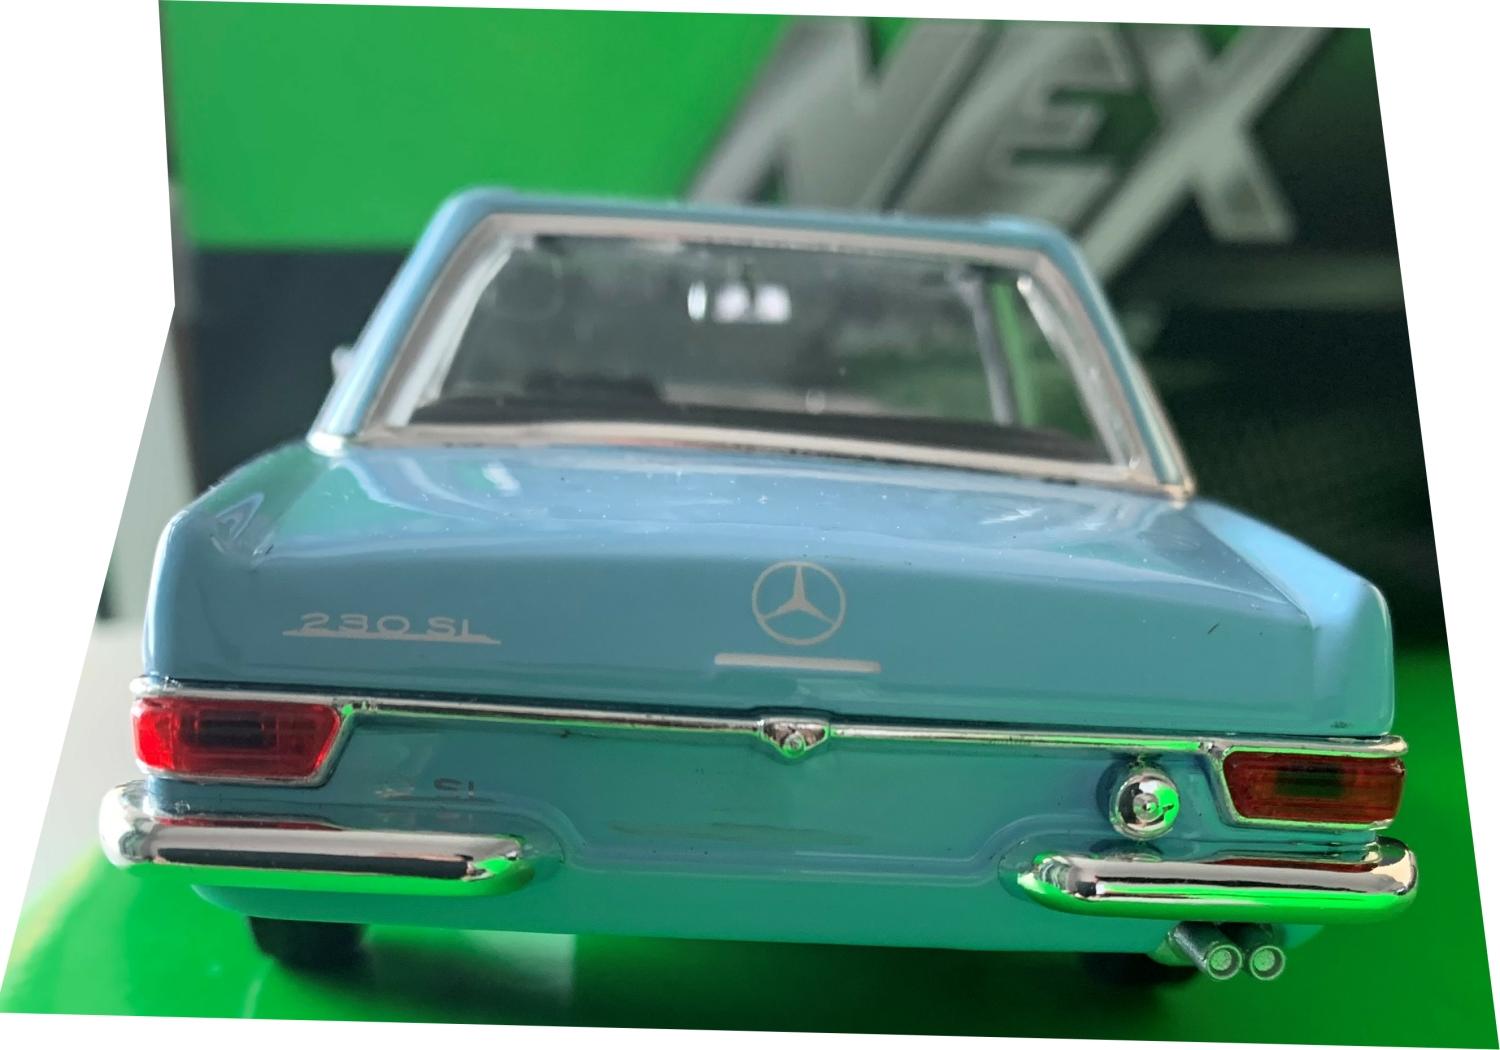 Mercedes Benz 230 SL (W113) 1963 in light blue 1:24 scale model from Welly